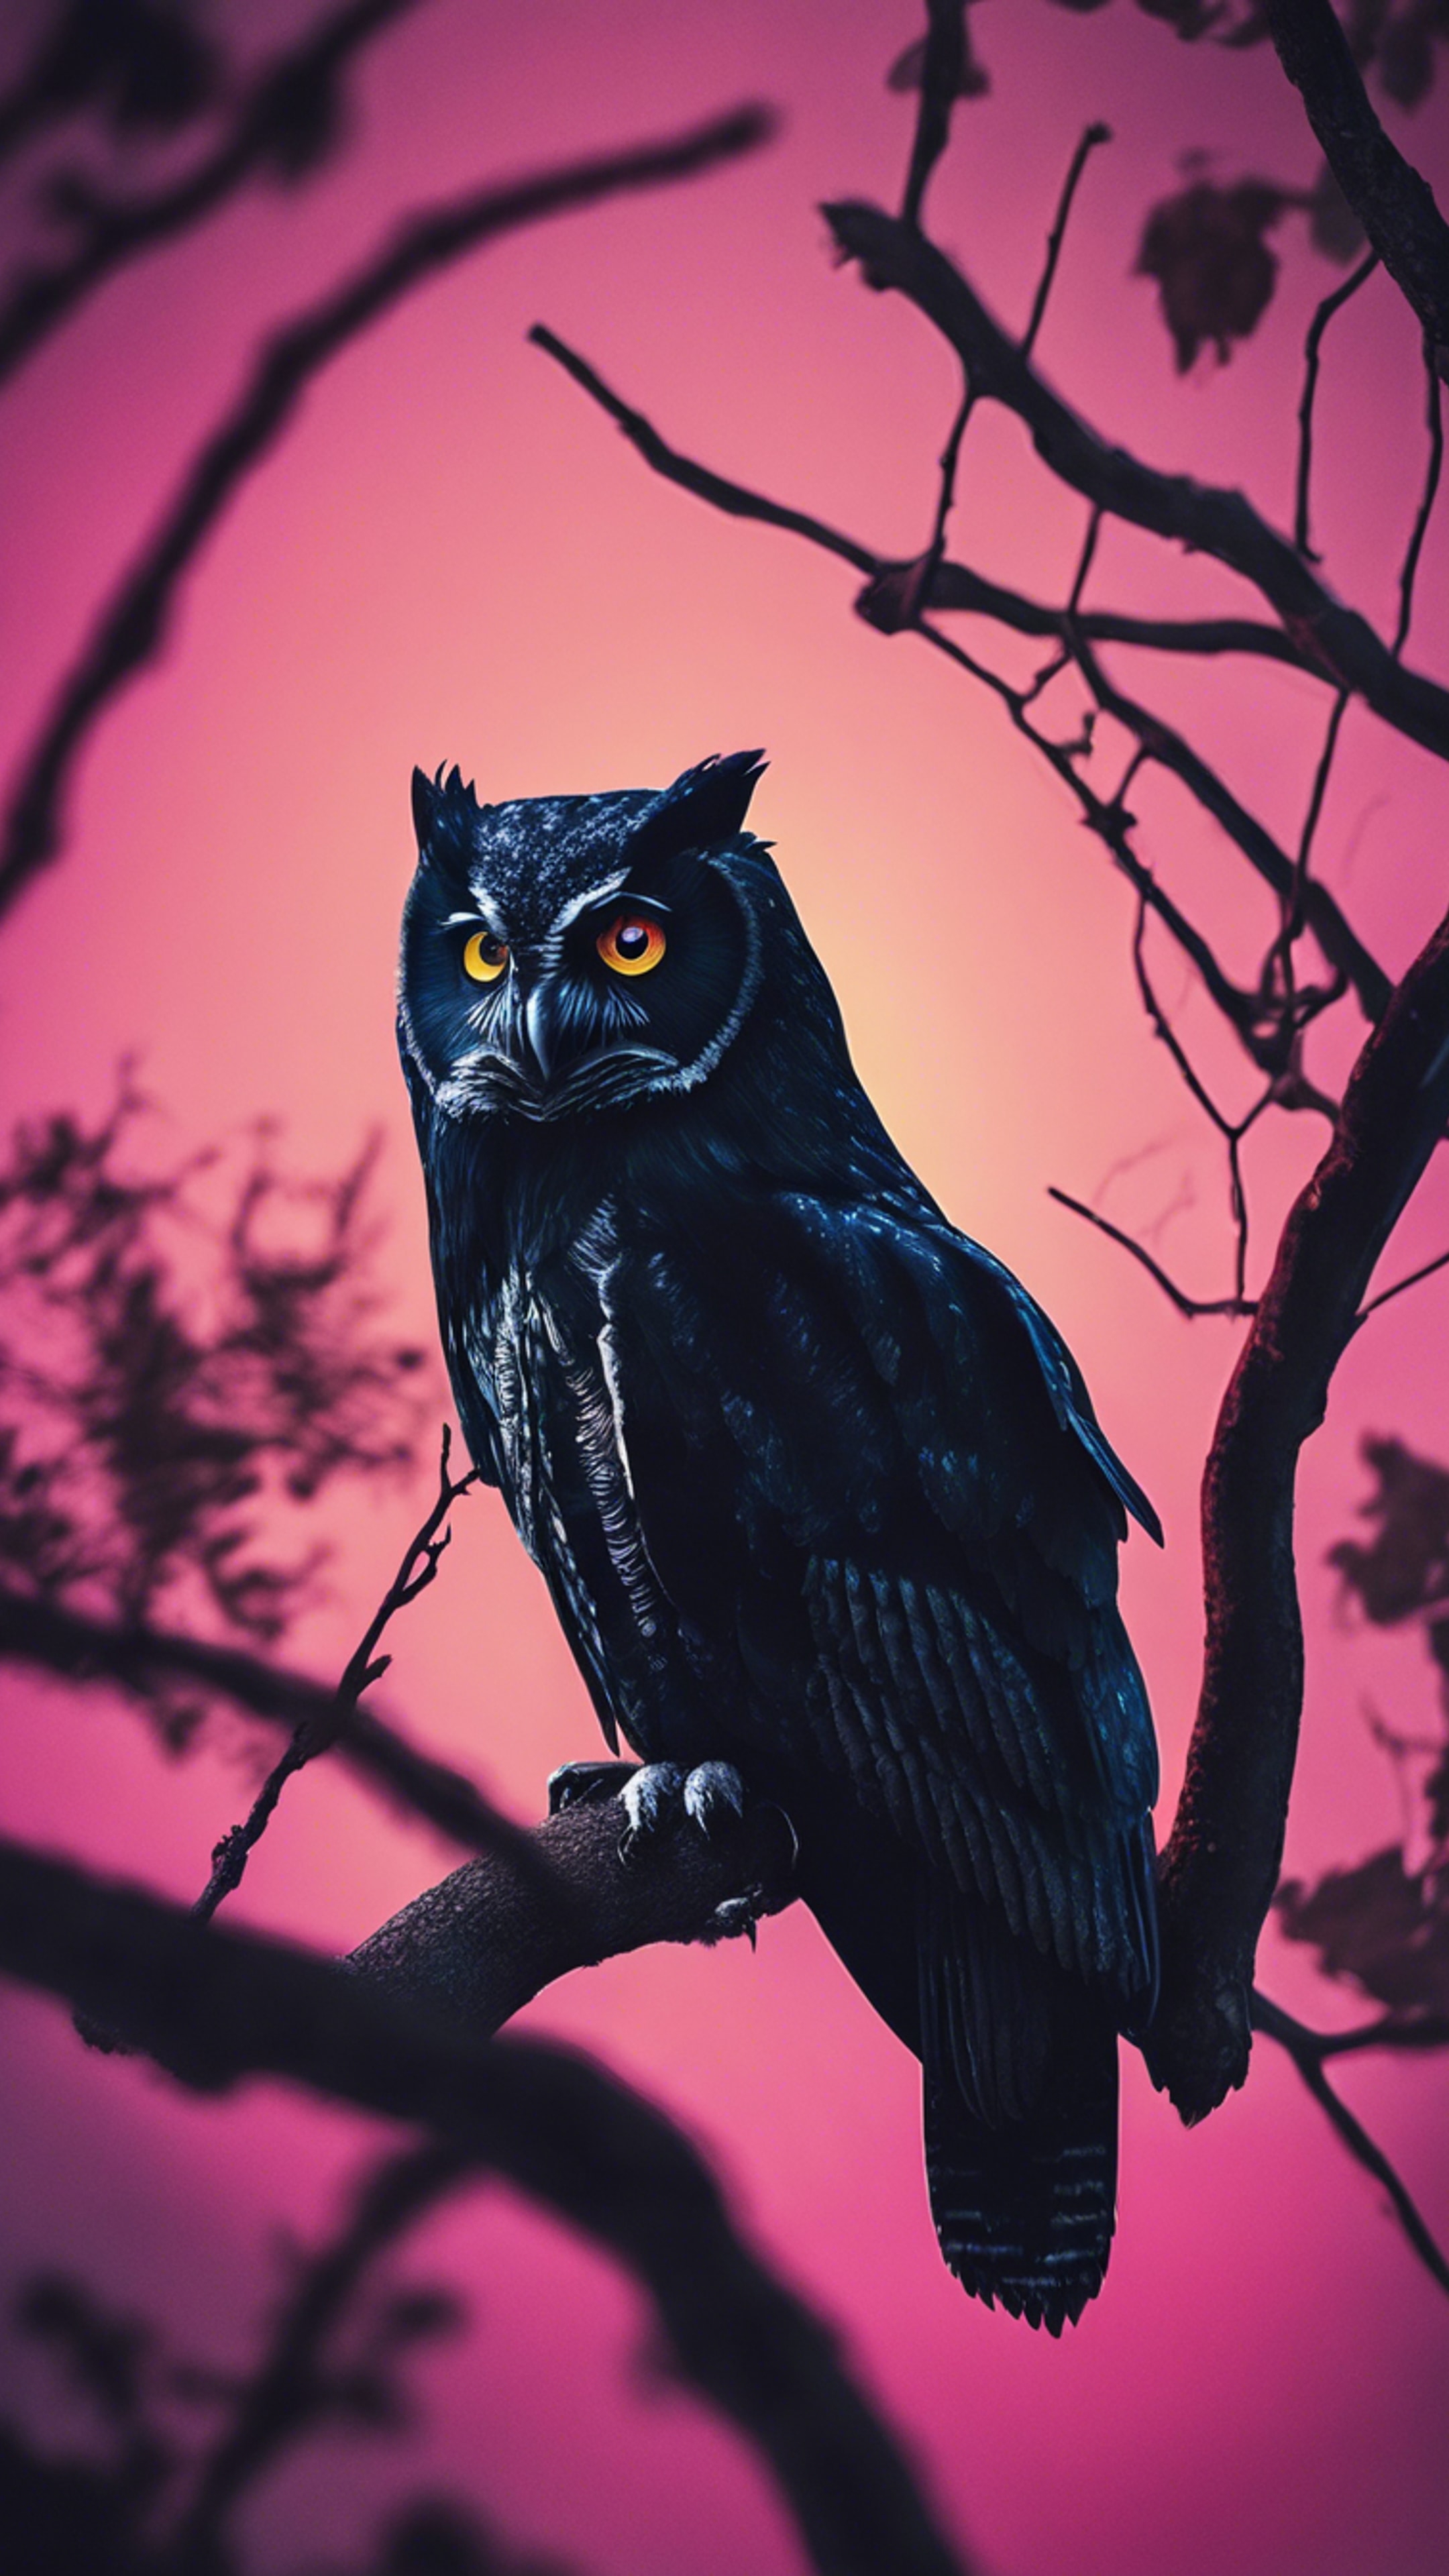 A pitch black owl, its eyes glowing in cool neon colors, perched on a tree branch on a moonless night.壁紙[de9c9fccdafb4c81814c]